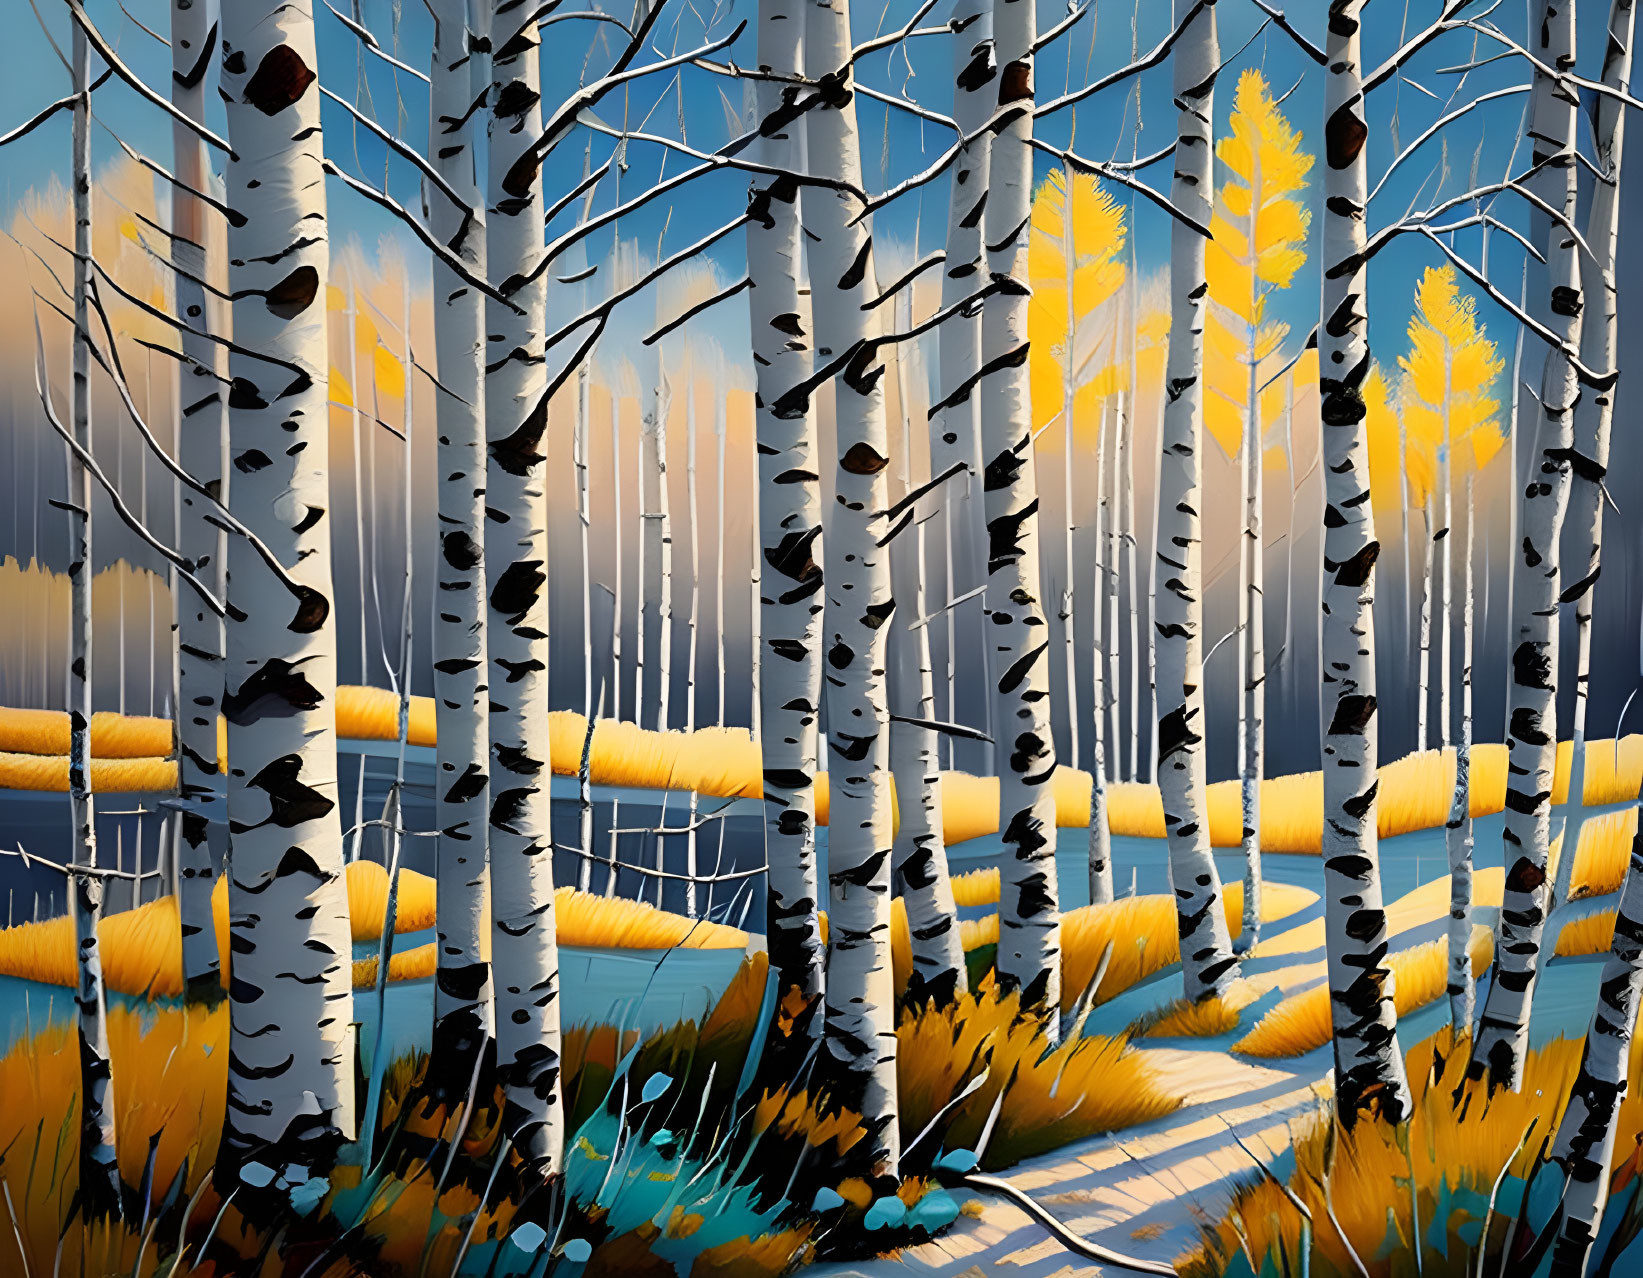 Colorful Birch Forest Painting with Yellow Leaves and Blue Skies